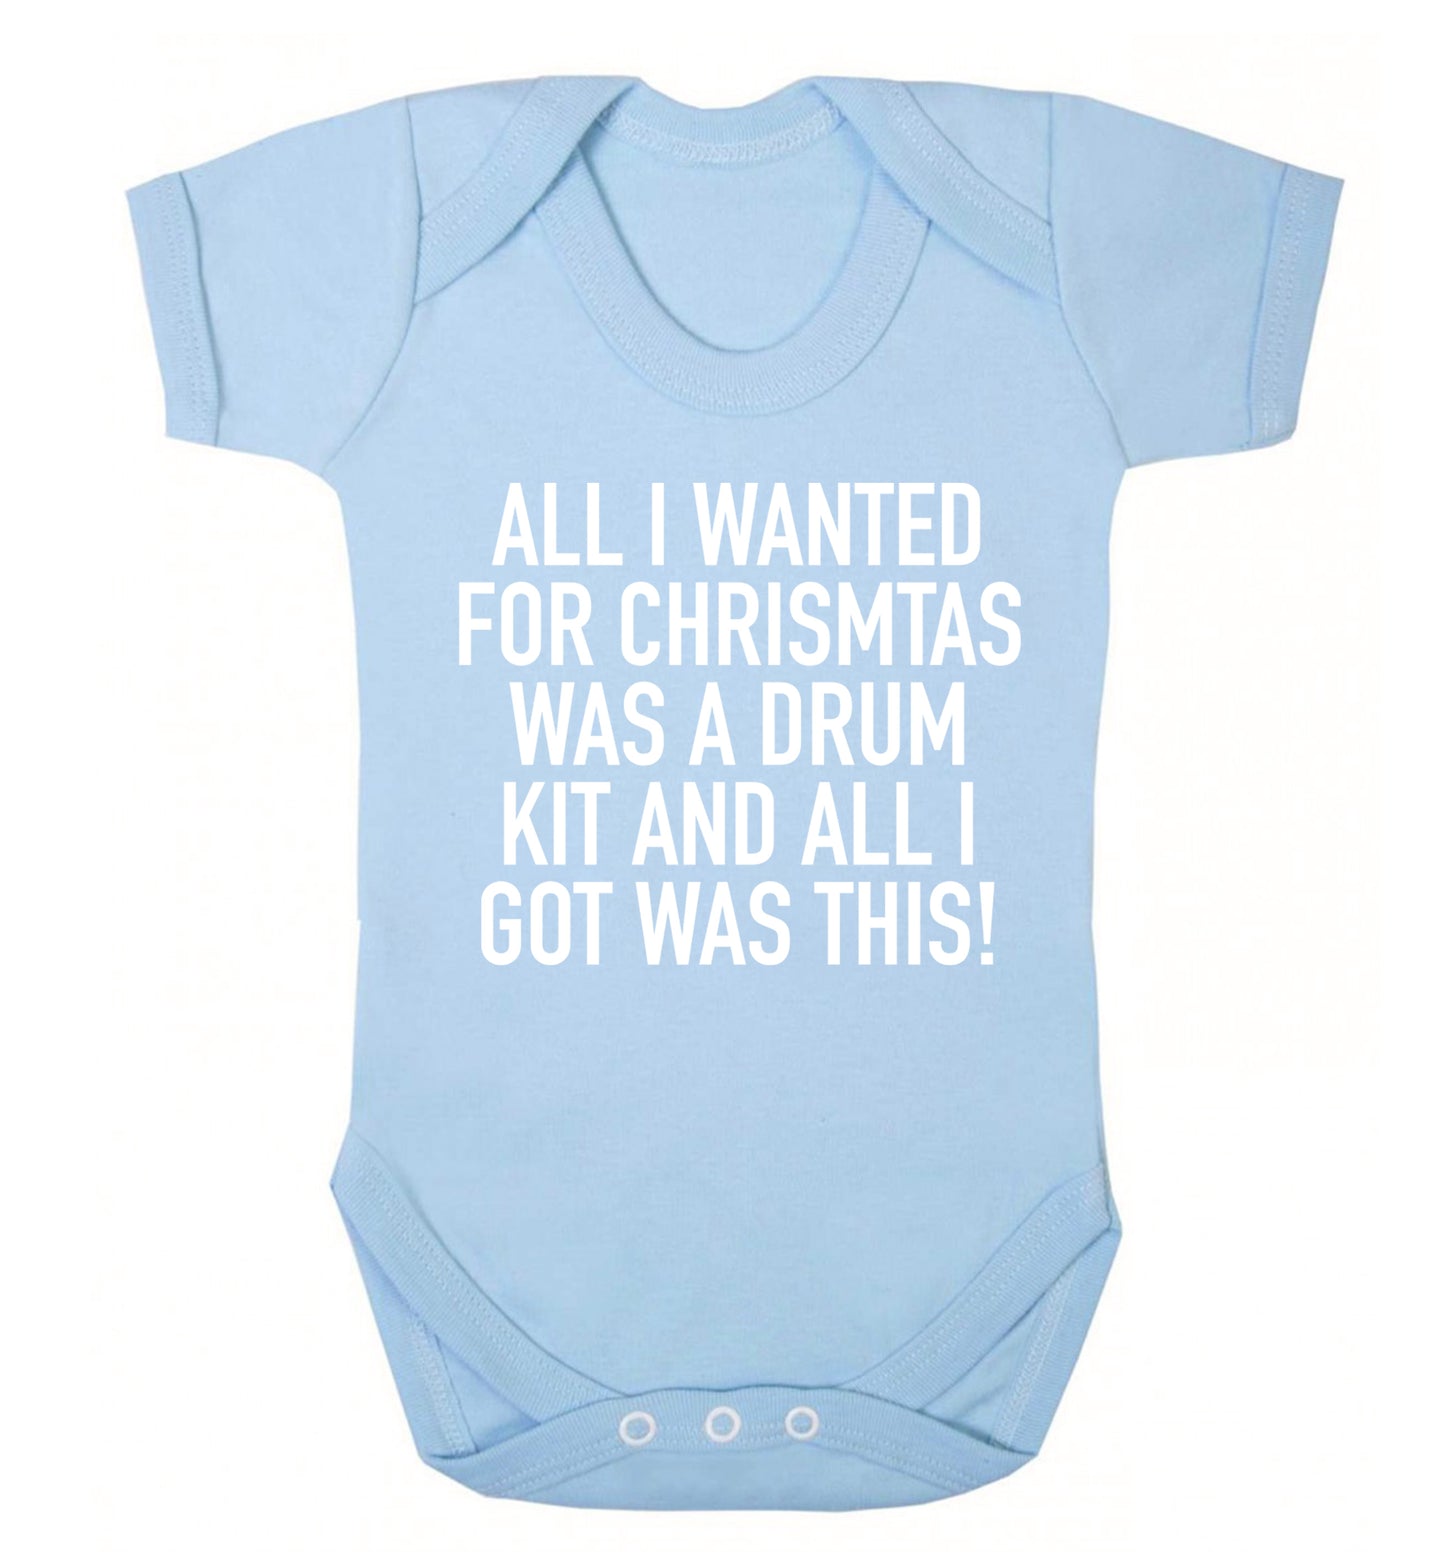 All I wanted for Christmas was a drum kit and all I got was this! Baby Vest pale blue 18-24 months